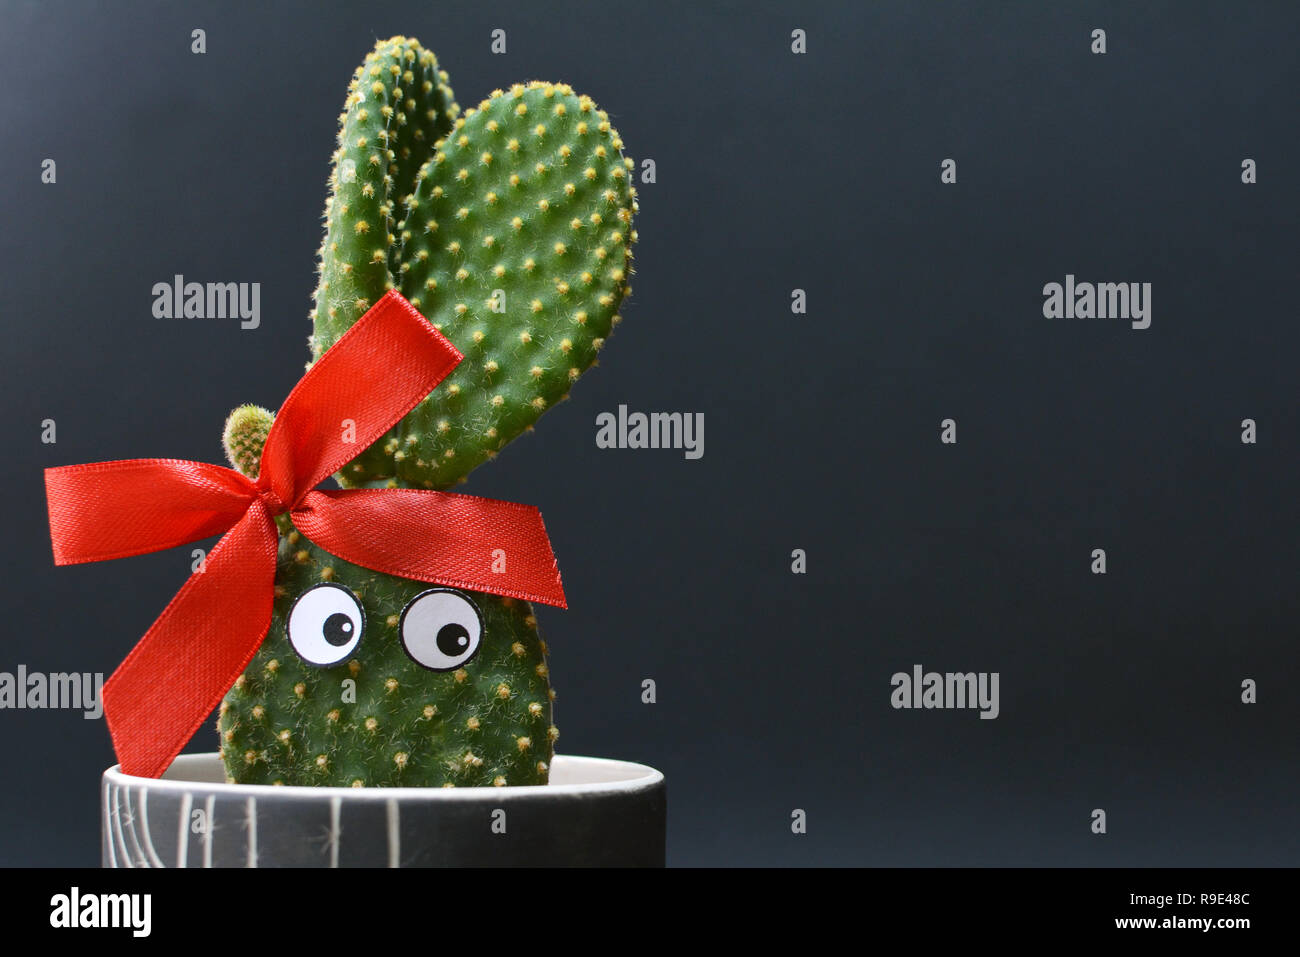 Funny potted Opuntia microdasys bunny ears cactus with googly eyes in front of dark background Stock Photo